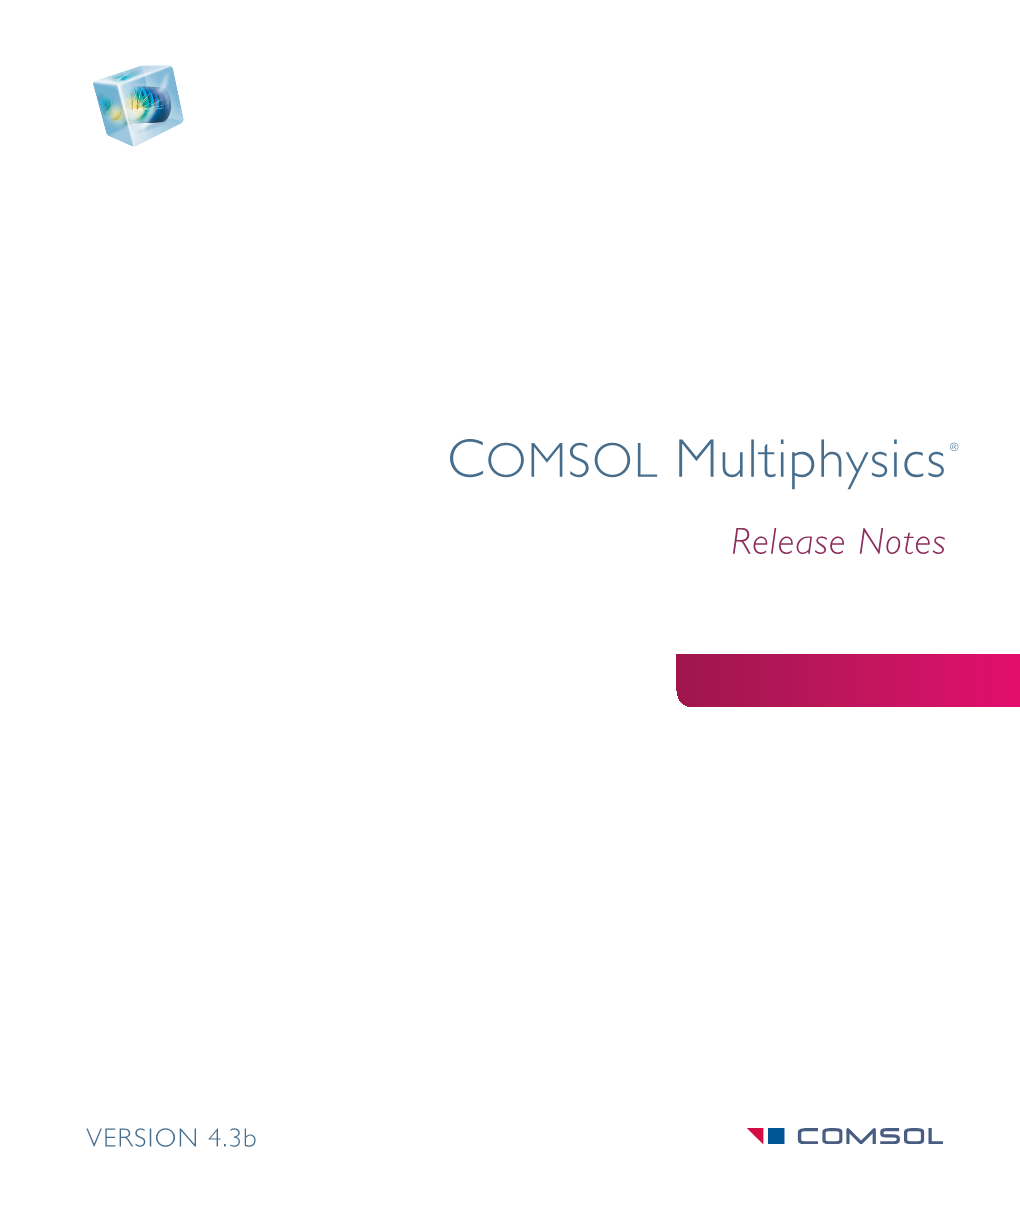 The COMSOL Multiphysics Release Notes